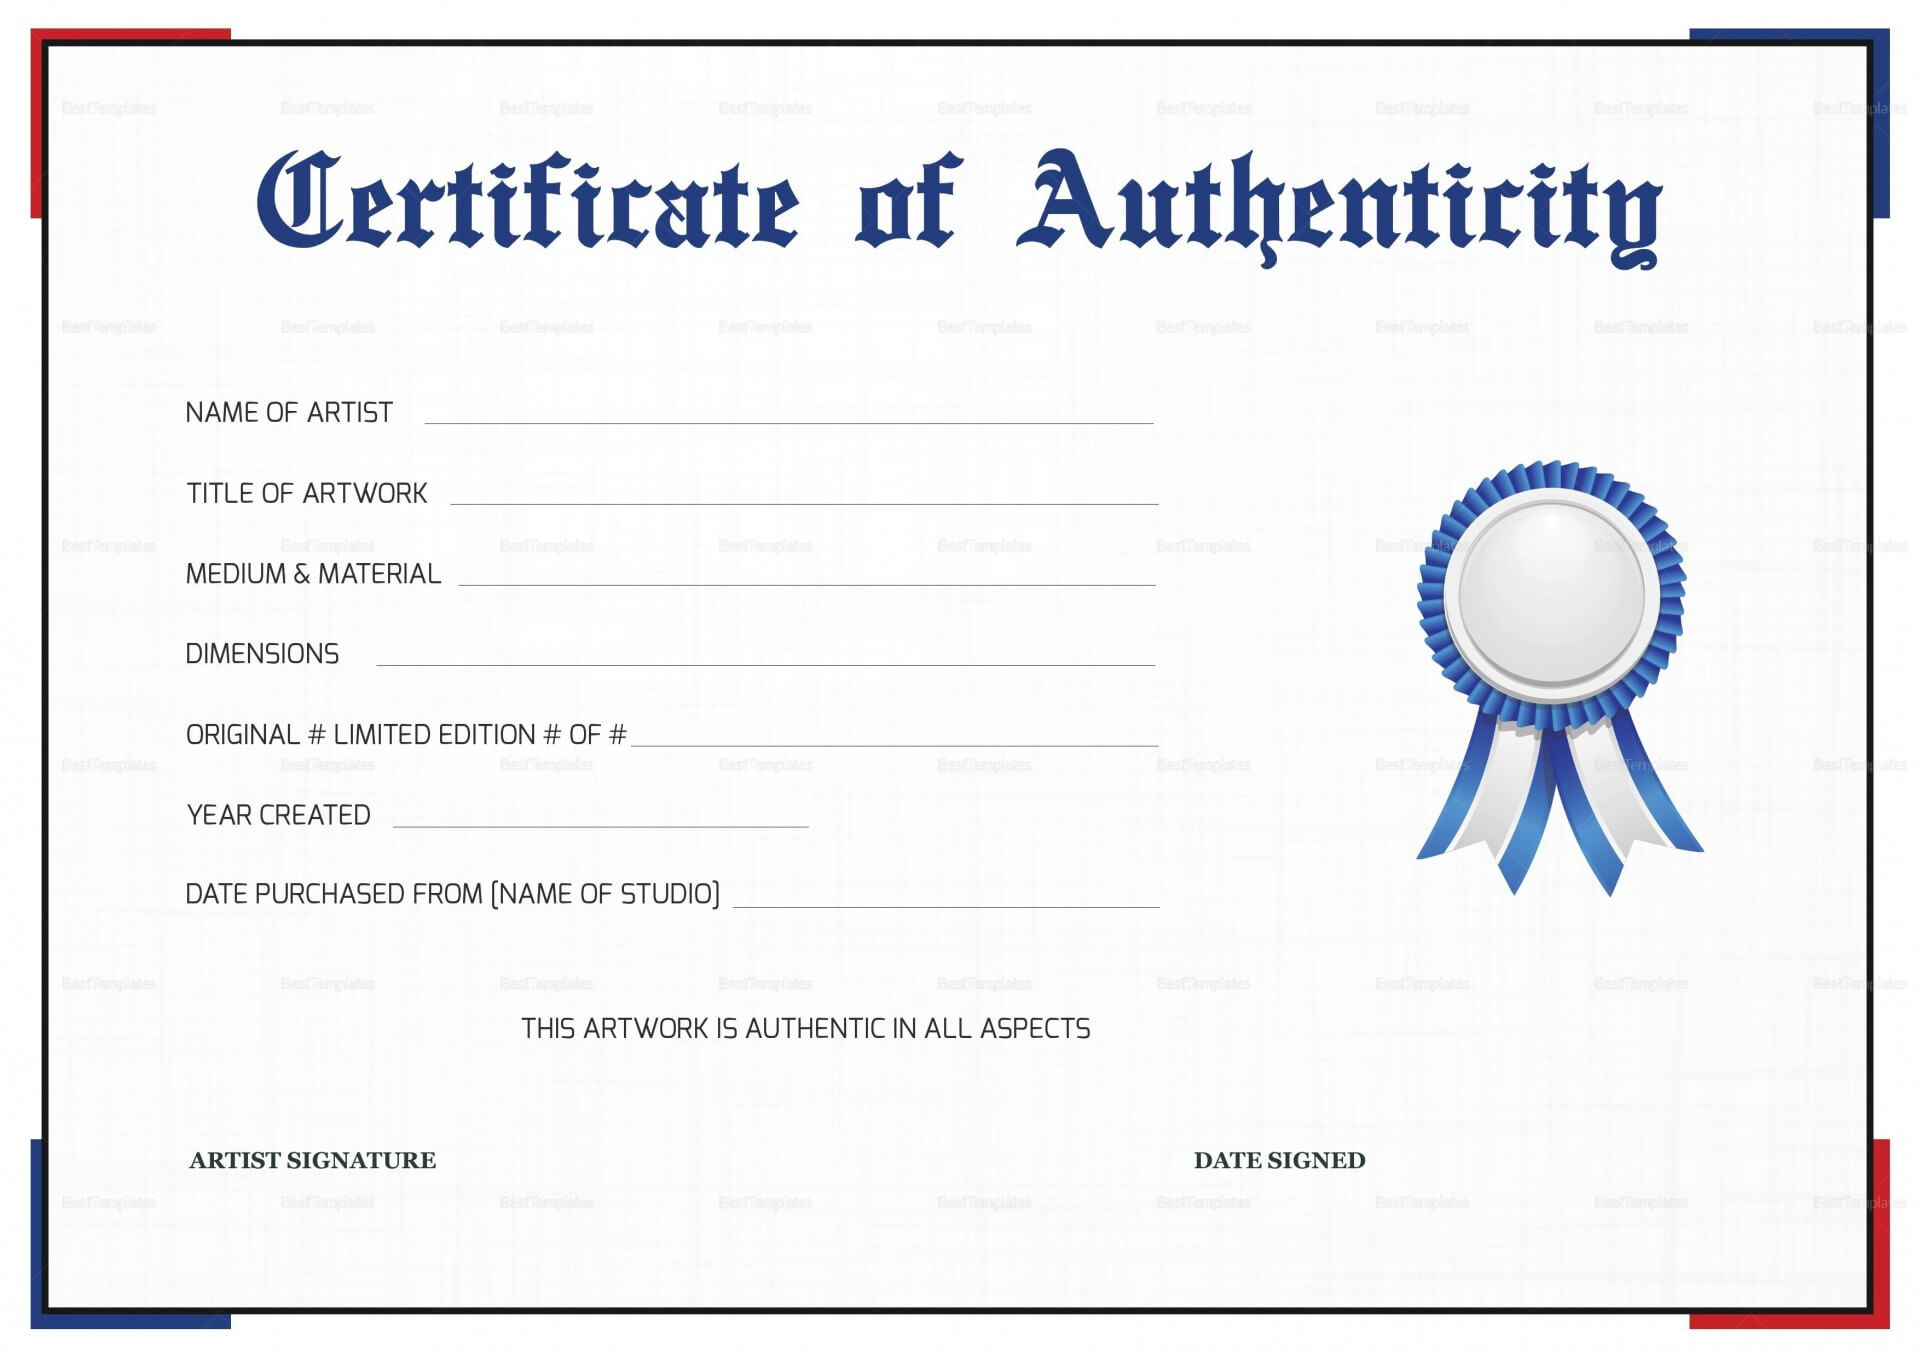 011 Certificate Of Authenticity Artwork Template Resume Art Regarding Art Certificate Template Free